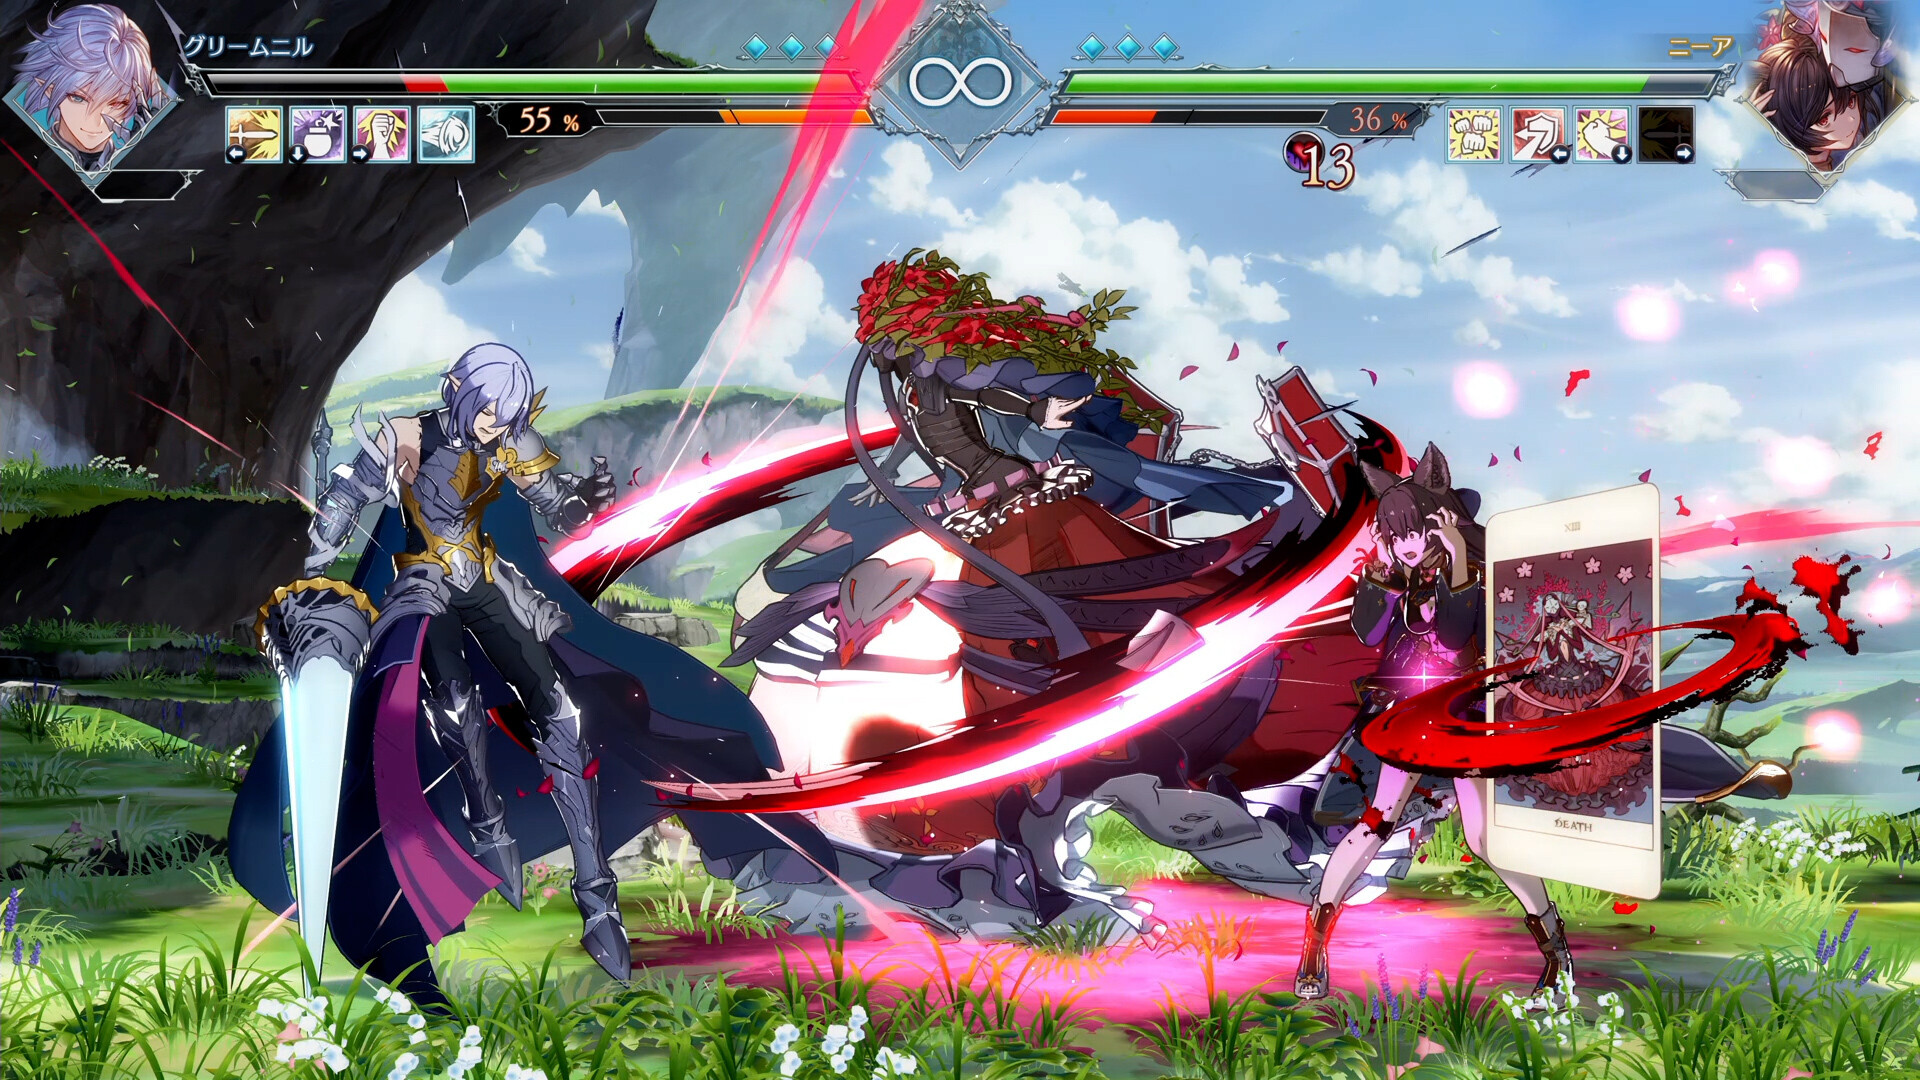 Granblue Fantasy Versus: Rising review – Anime and D&D clash in thrilling  form - Dexerto